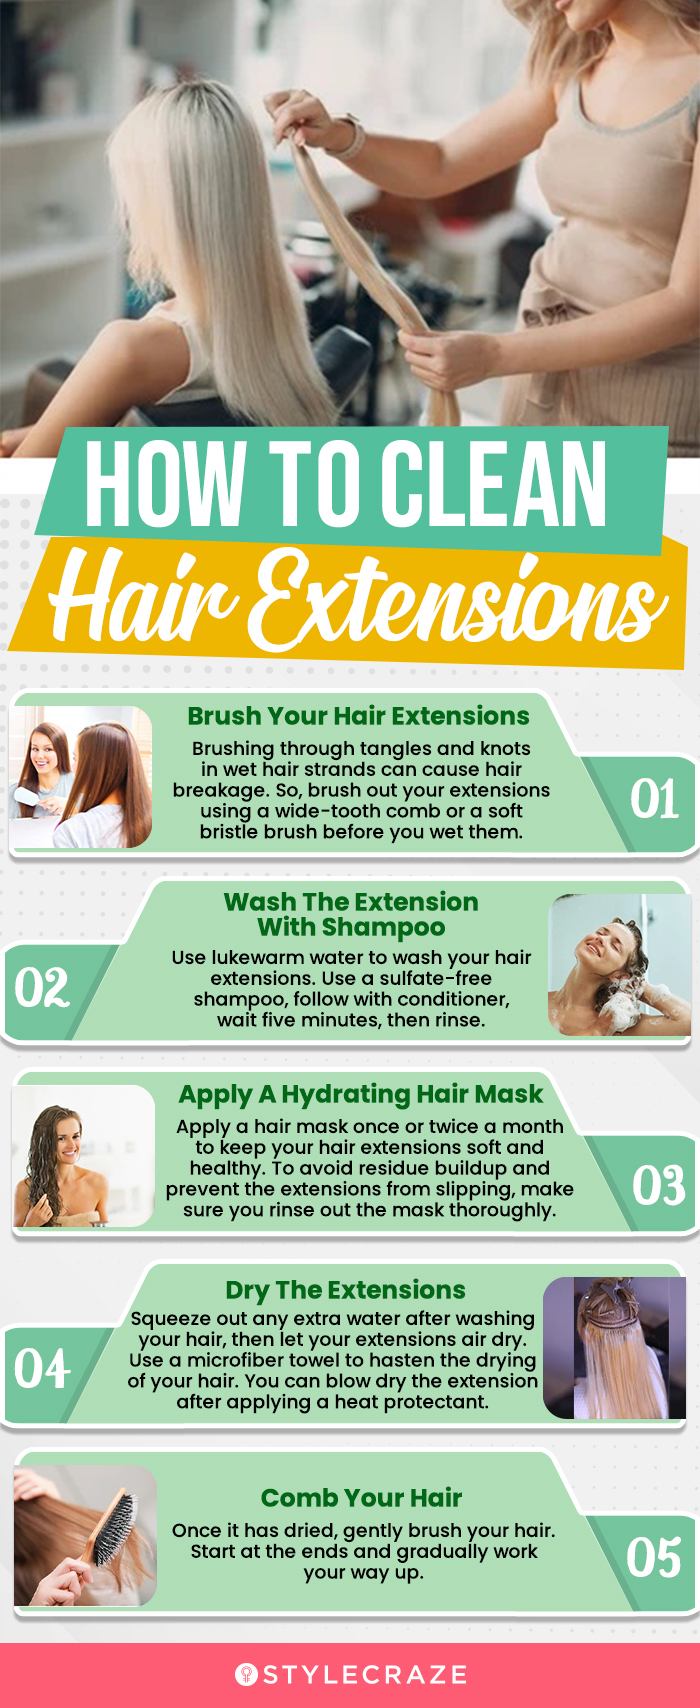 How To Clean Extensions (infographic)